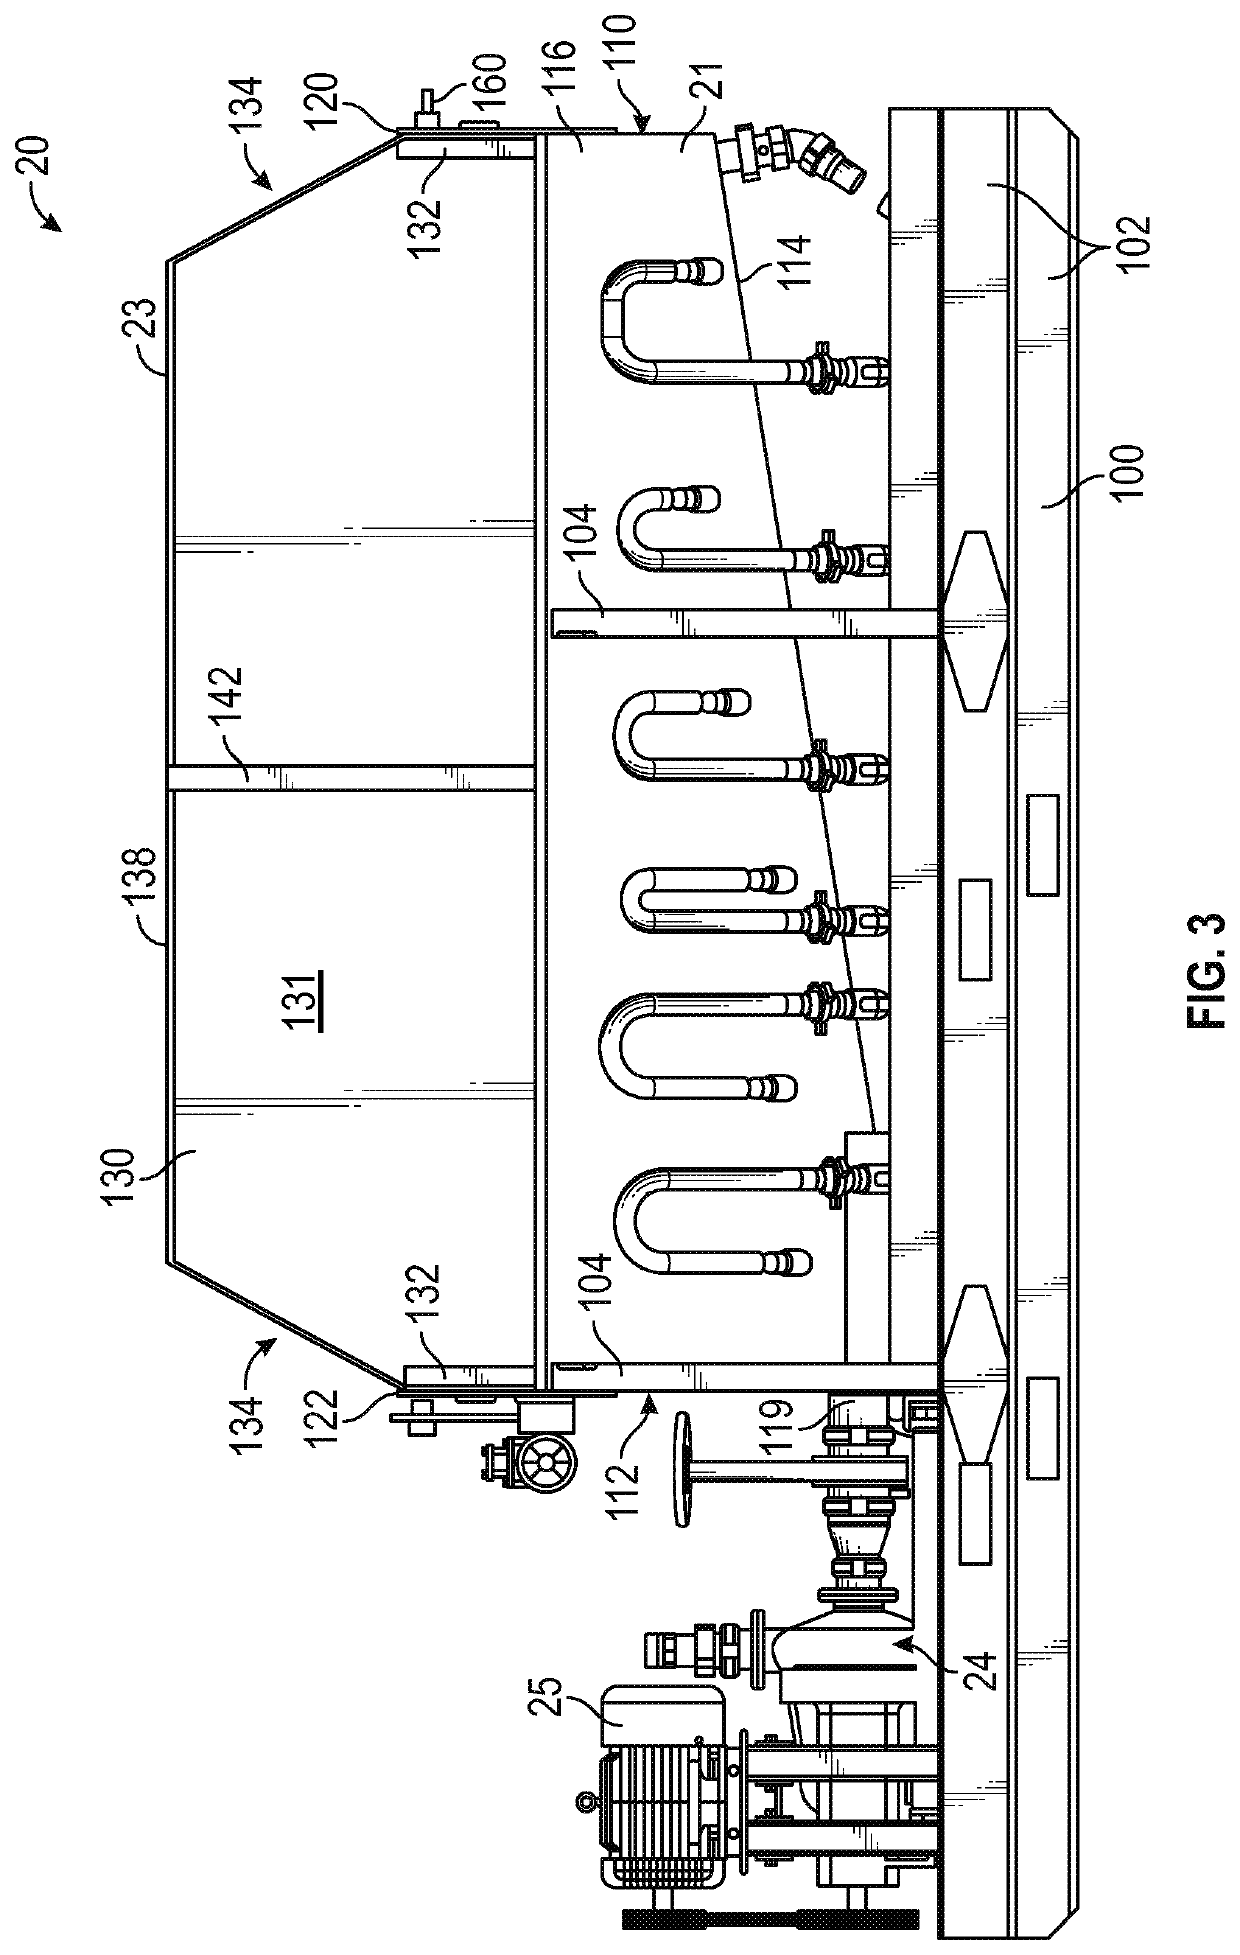 Method and apparatus for the recovery of drilling fluid from shaker tailings during active drilling